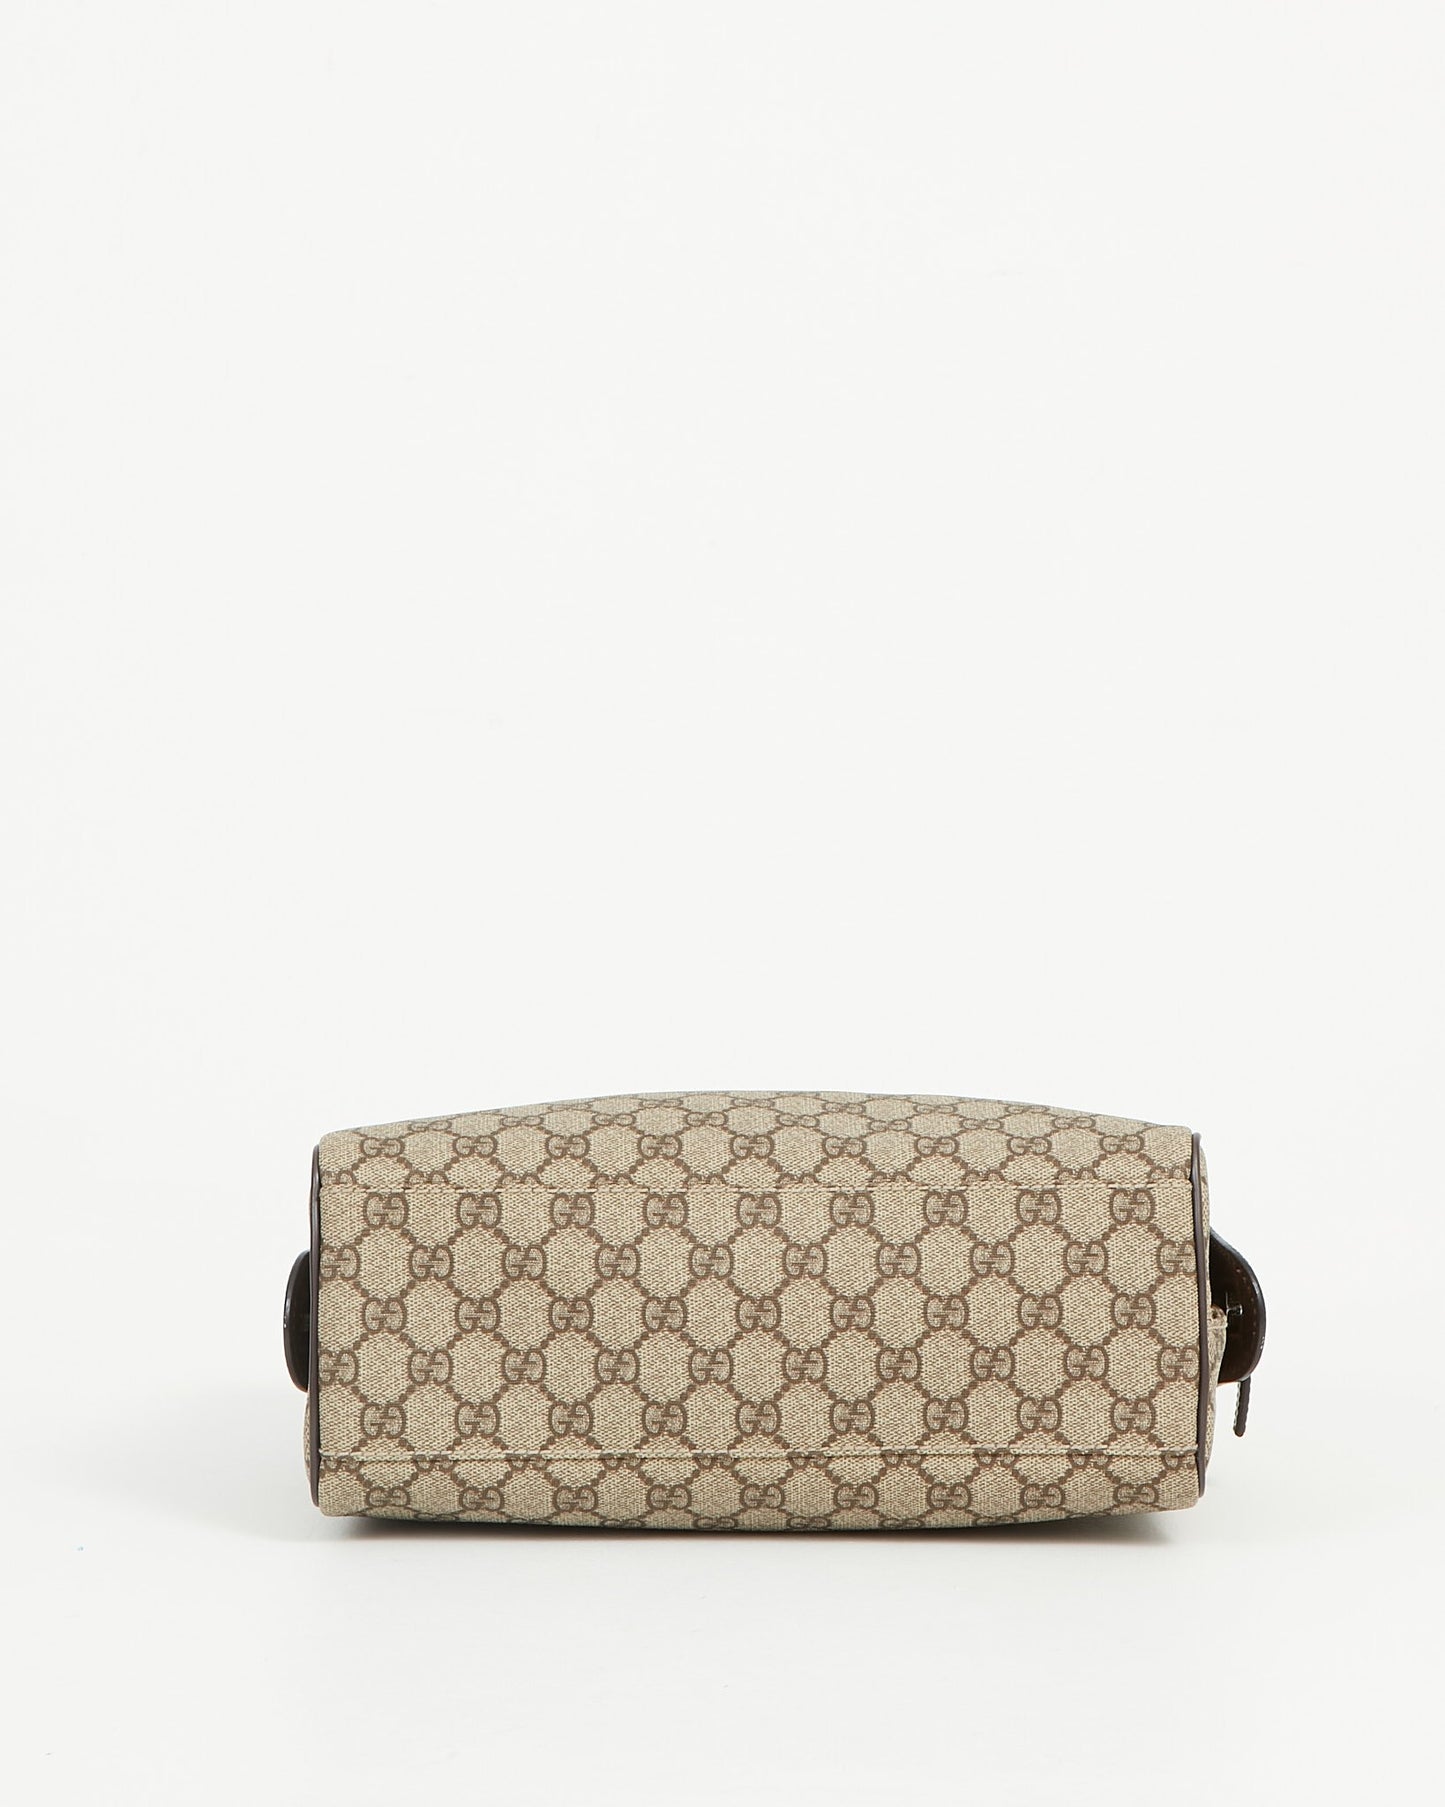 Gucci Brown GG Supreme Coated Canvas Toiletry Pouch